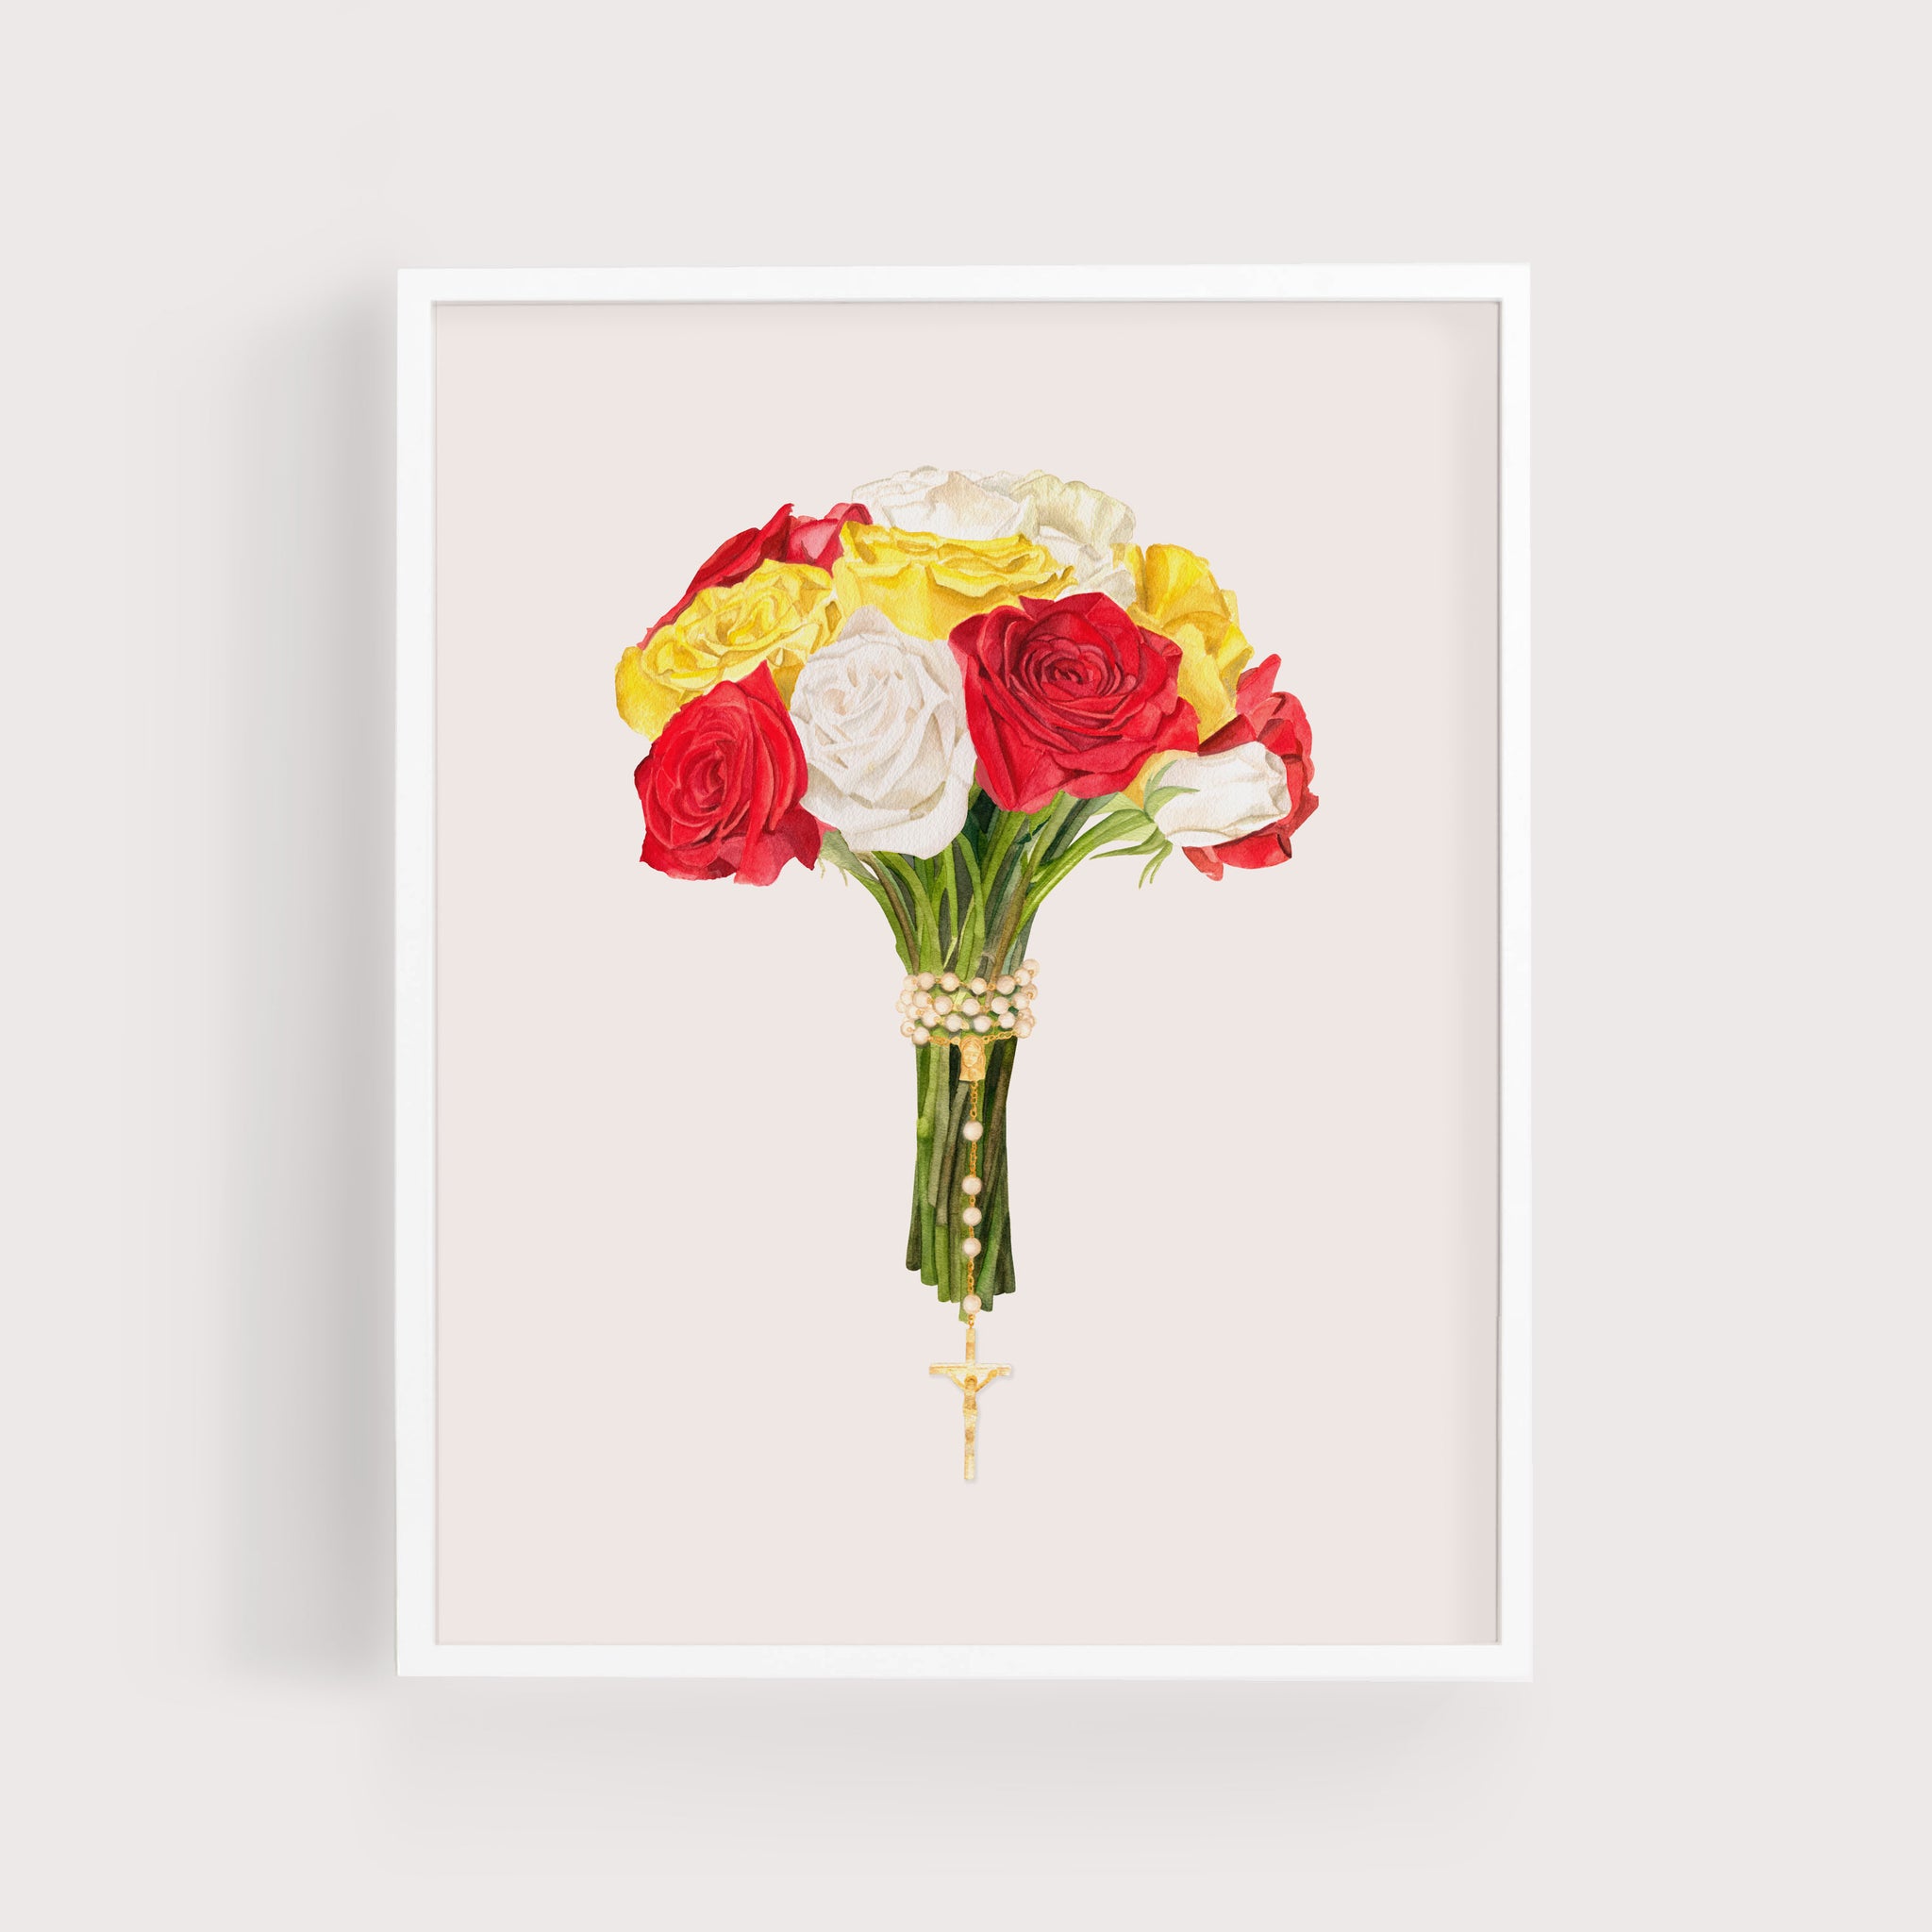 Beautiful Vintage Roses Bouquet. Red Roses Digital Art Print Poster by  Lulu8g8